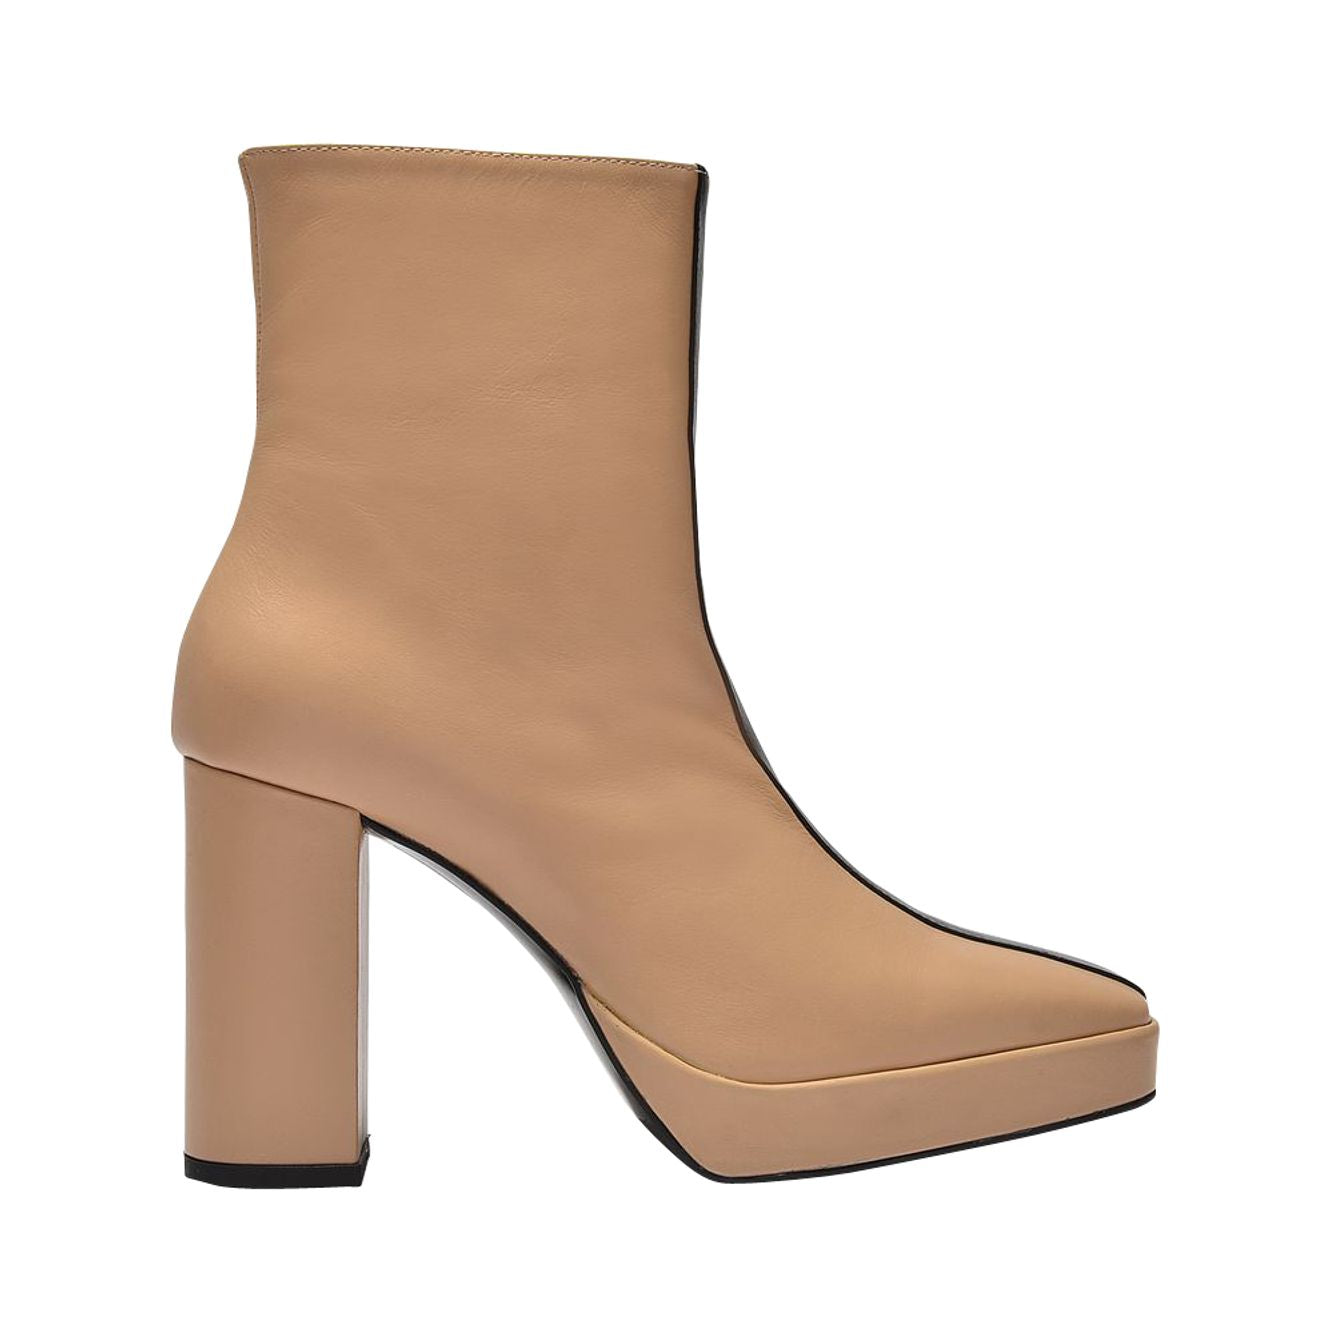 ANNY NORD CROSSING THE LINE ANKLE BOOTS IN BEIGE AND BLACK LEATHER